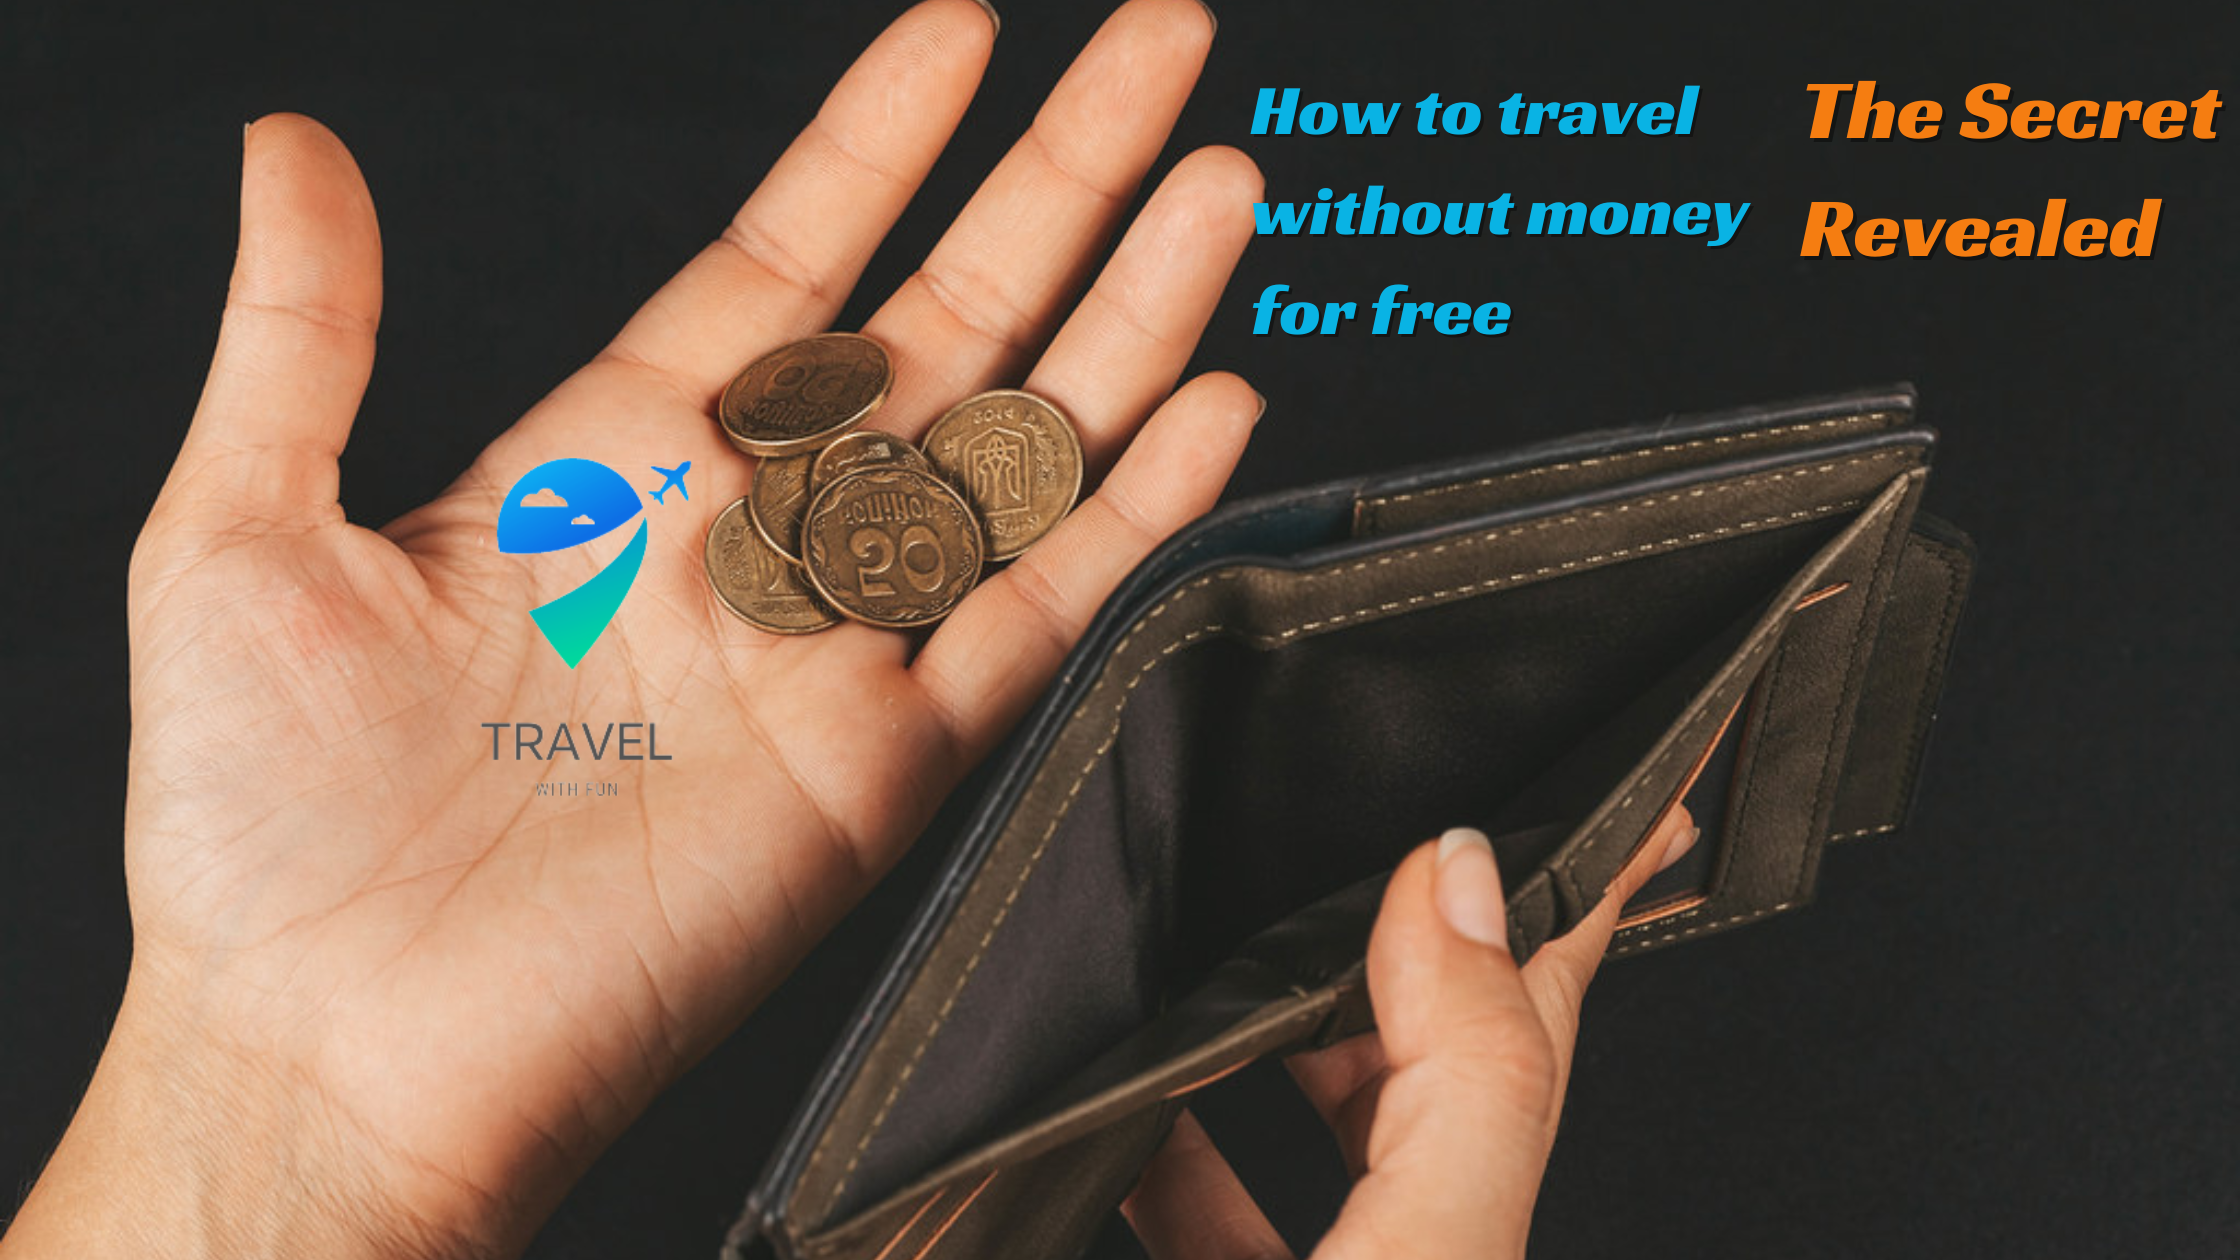 How to travel without money for free :The Secret Revealed